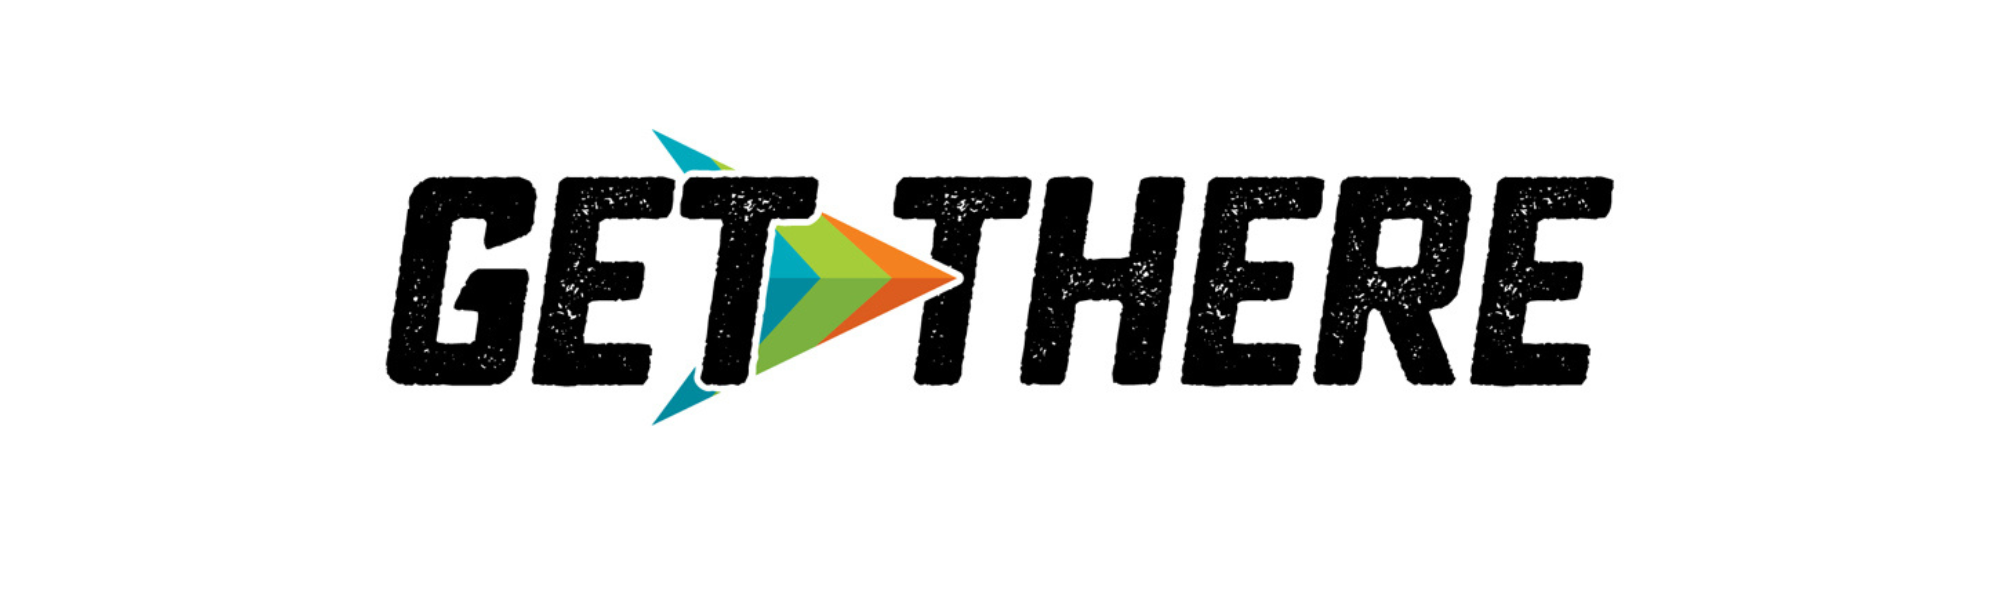 Get There Logo